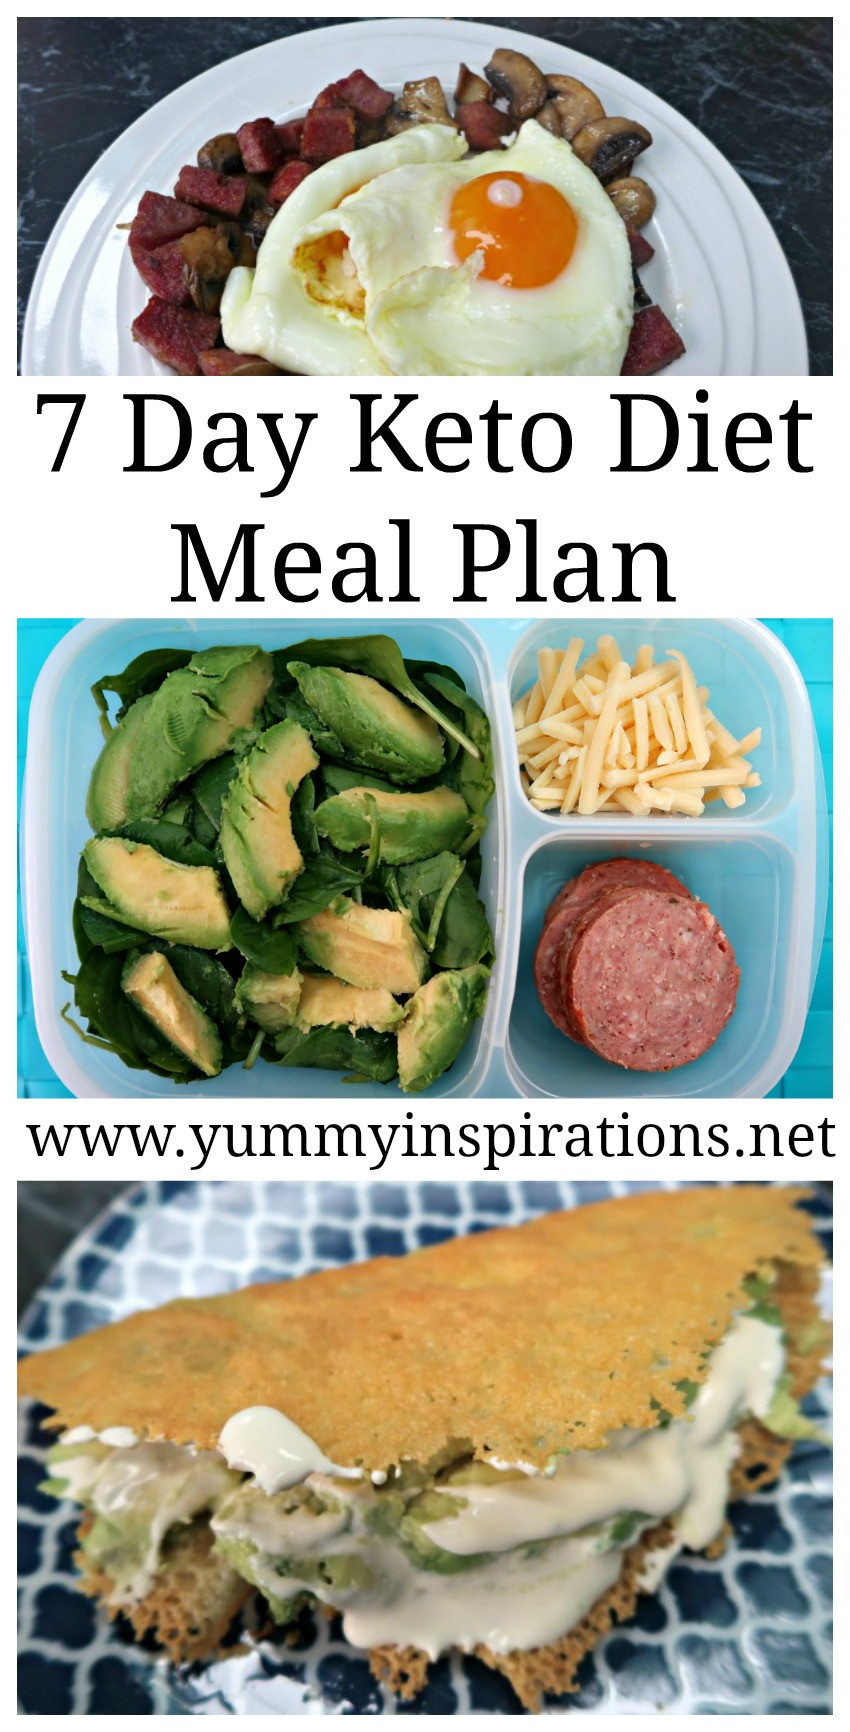 Keto Diet Meal Plan
 7 Day Keto Diet Meal Plan For Weight Loss Ketogenic Foods